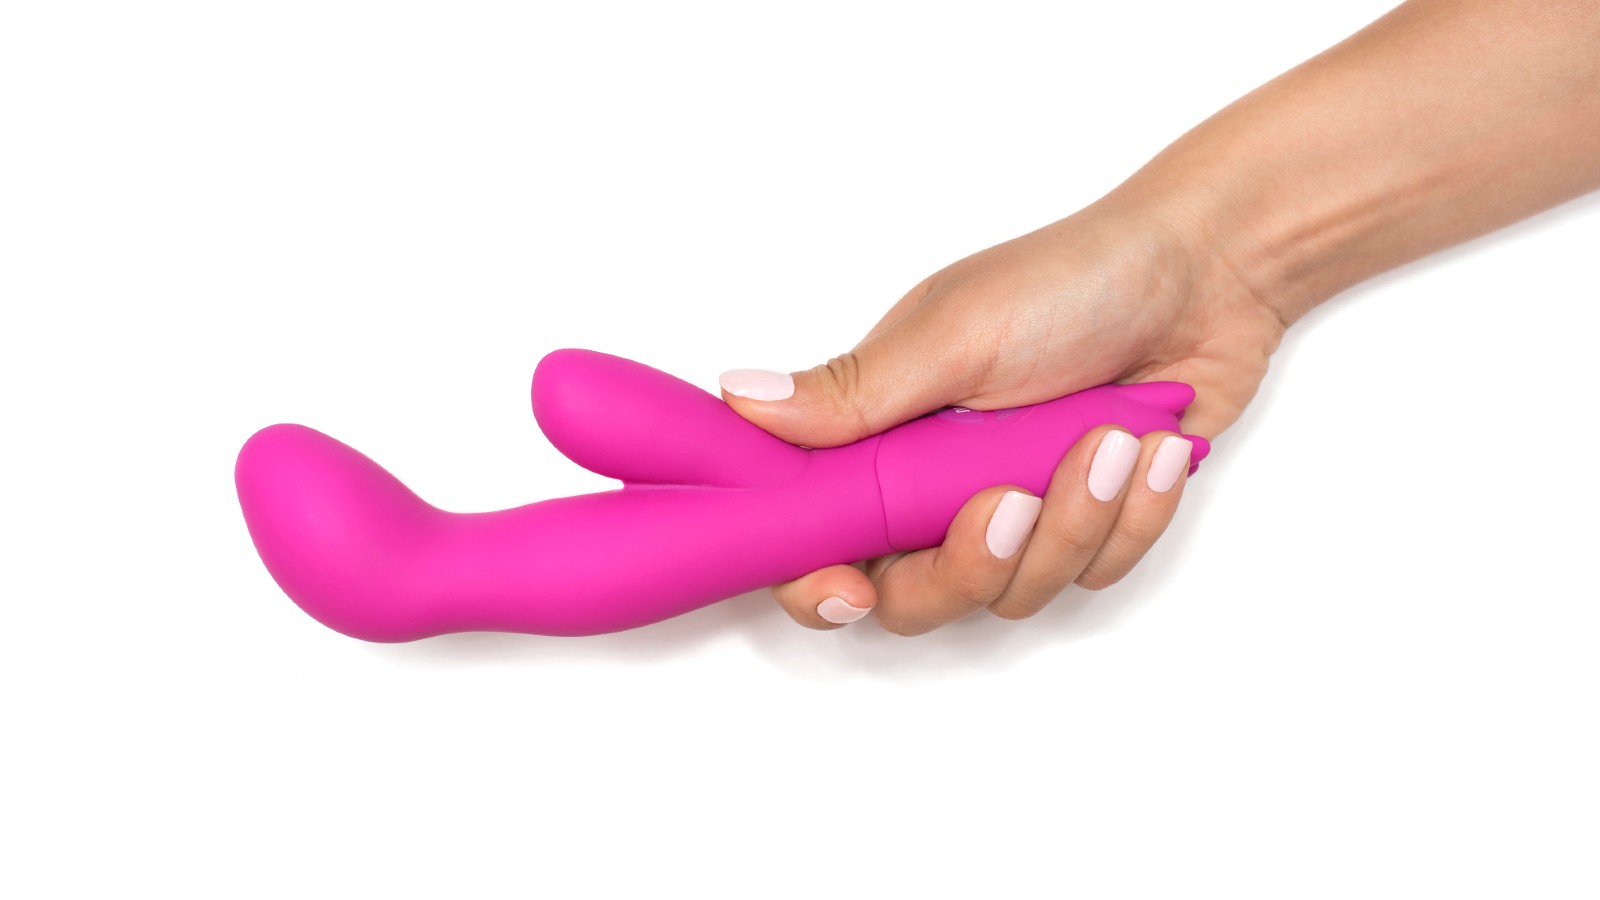 This Ella Paradis vibrator has an incredible 60% off right now and is sure  to sell out